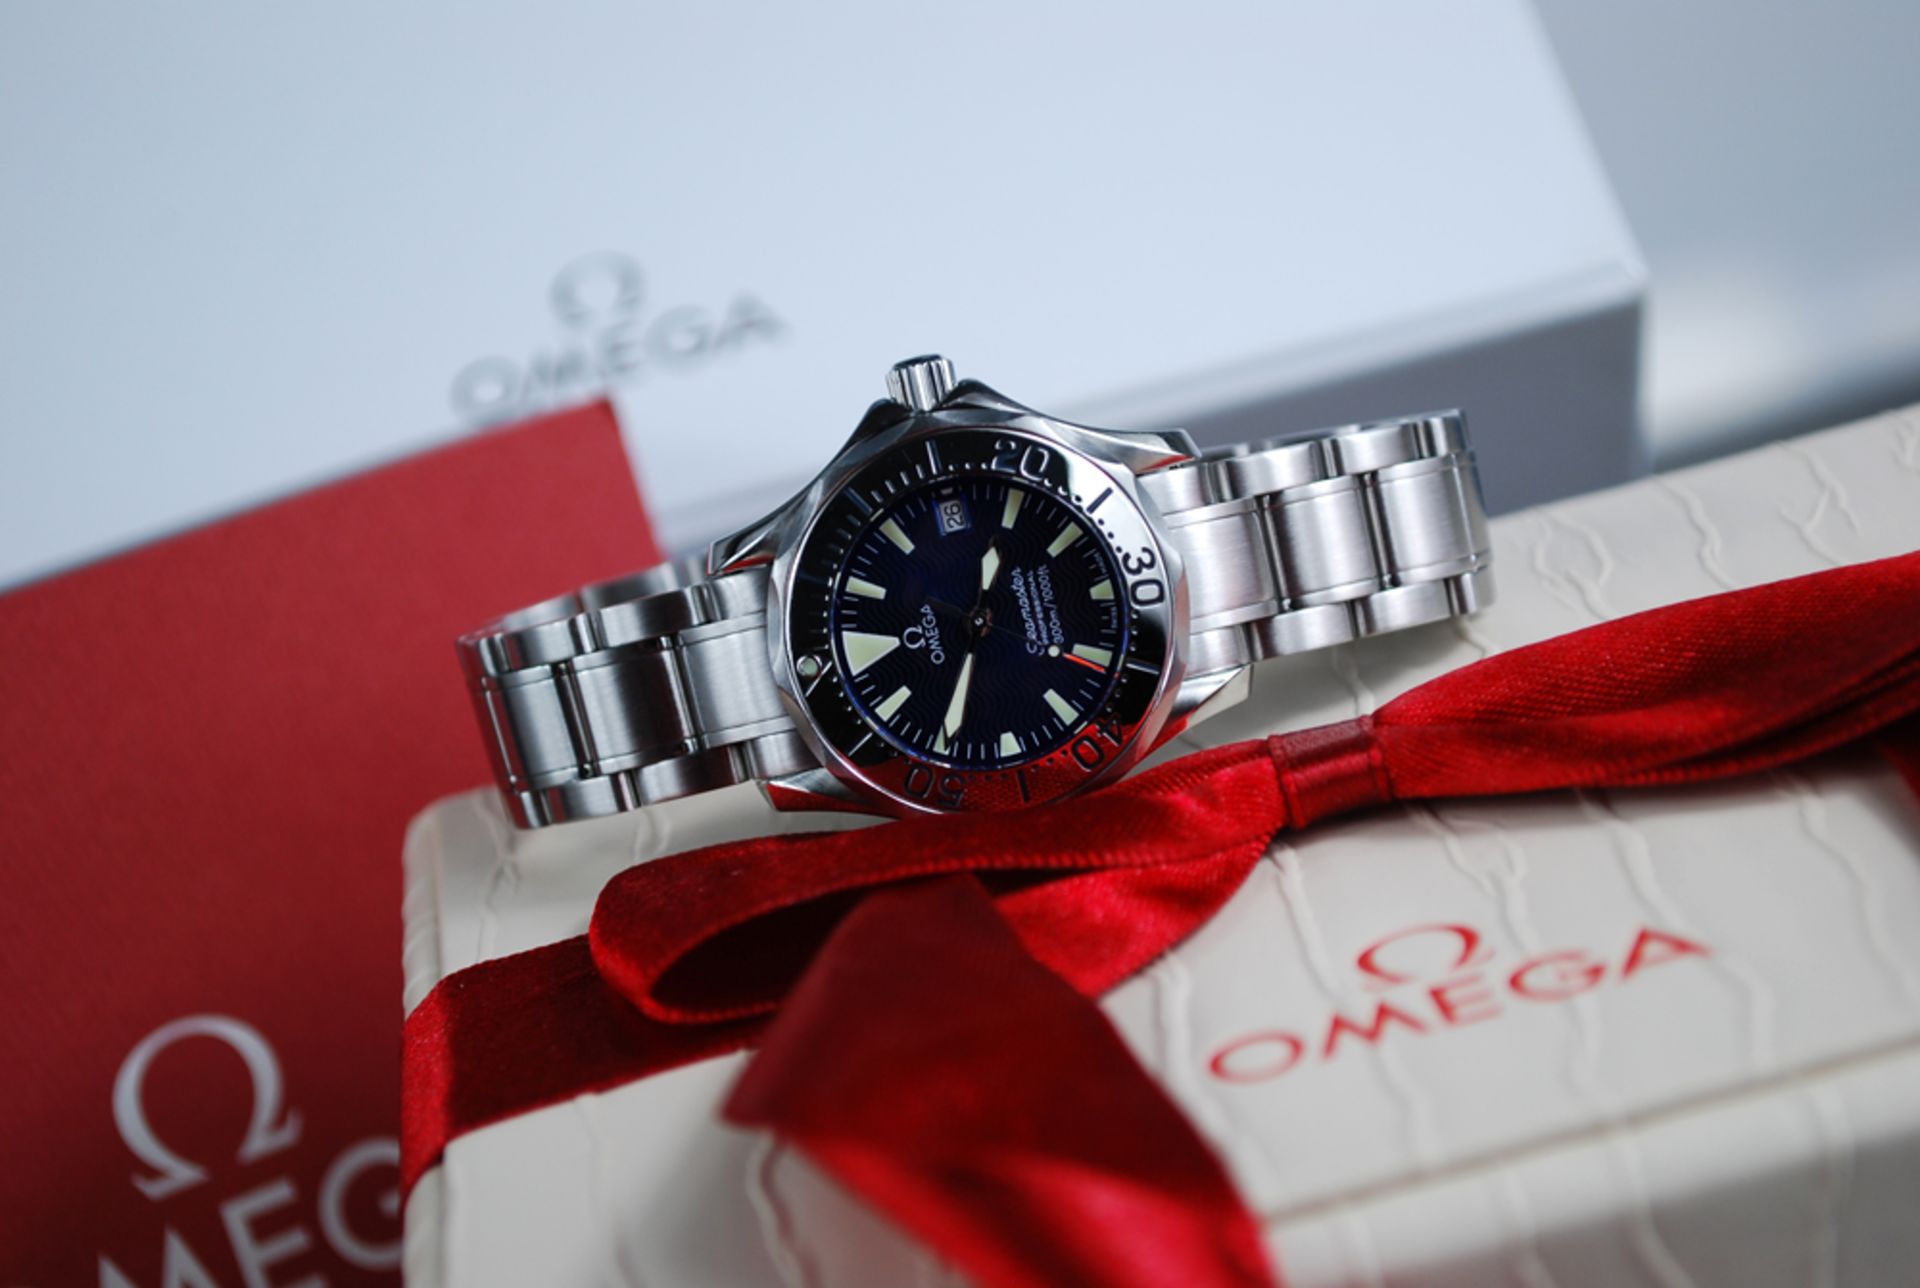 OMEGA SEAMASTER (Ladies) – '2285.80.00' Stainless Steel   Fantastic Watch - Condition: see imagery